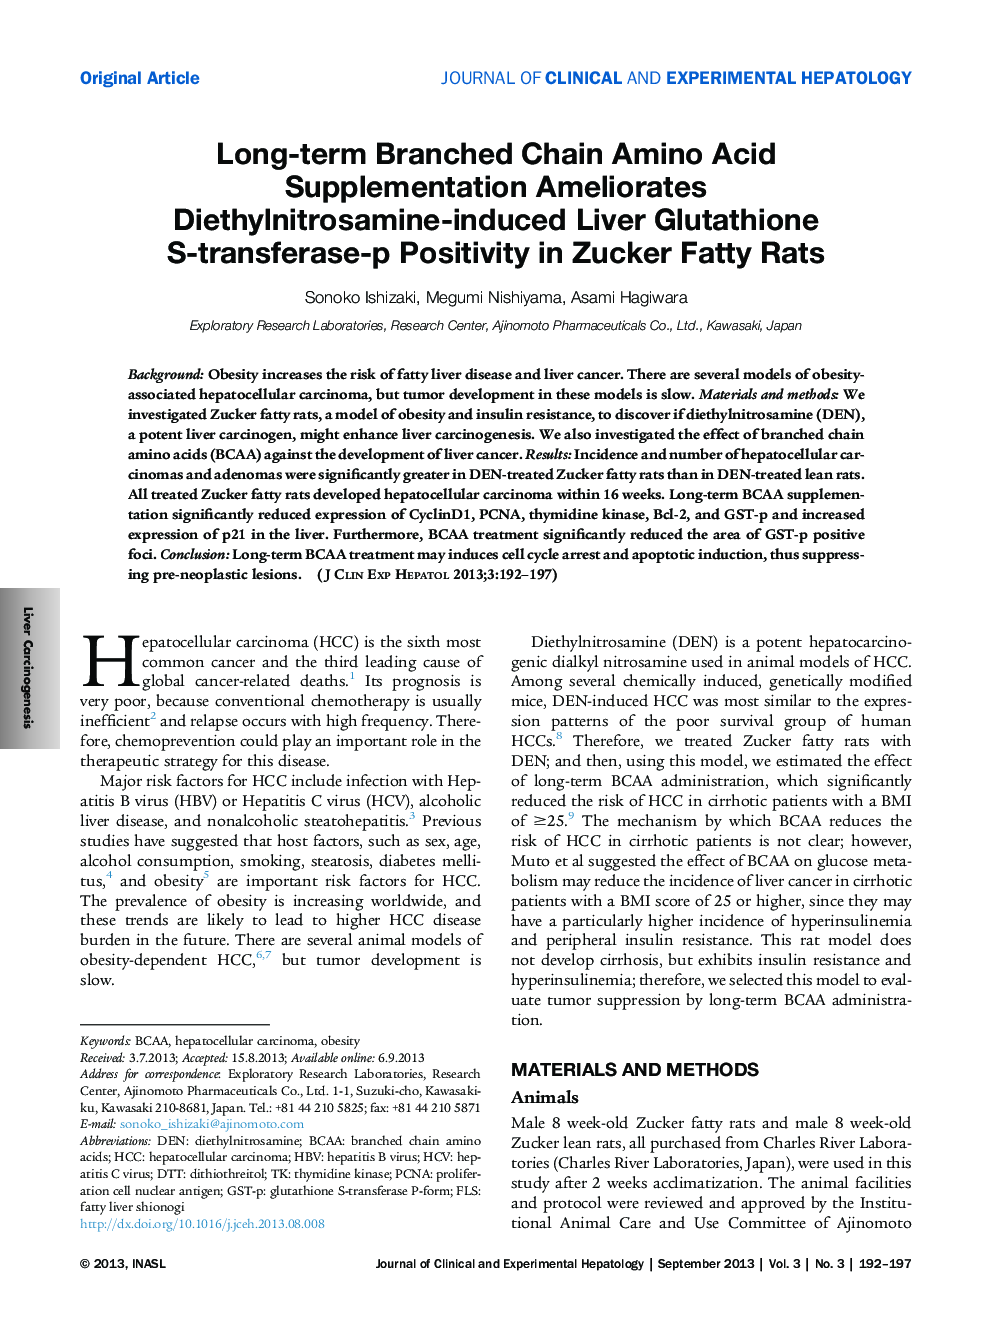 Long-term Branched Chain Amino Acid Supplementation Ameliorates Diethylnitrosamine-induced Liver Glutathione S-transferase-p Positivity in Zucker Fatty Rats